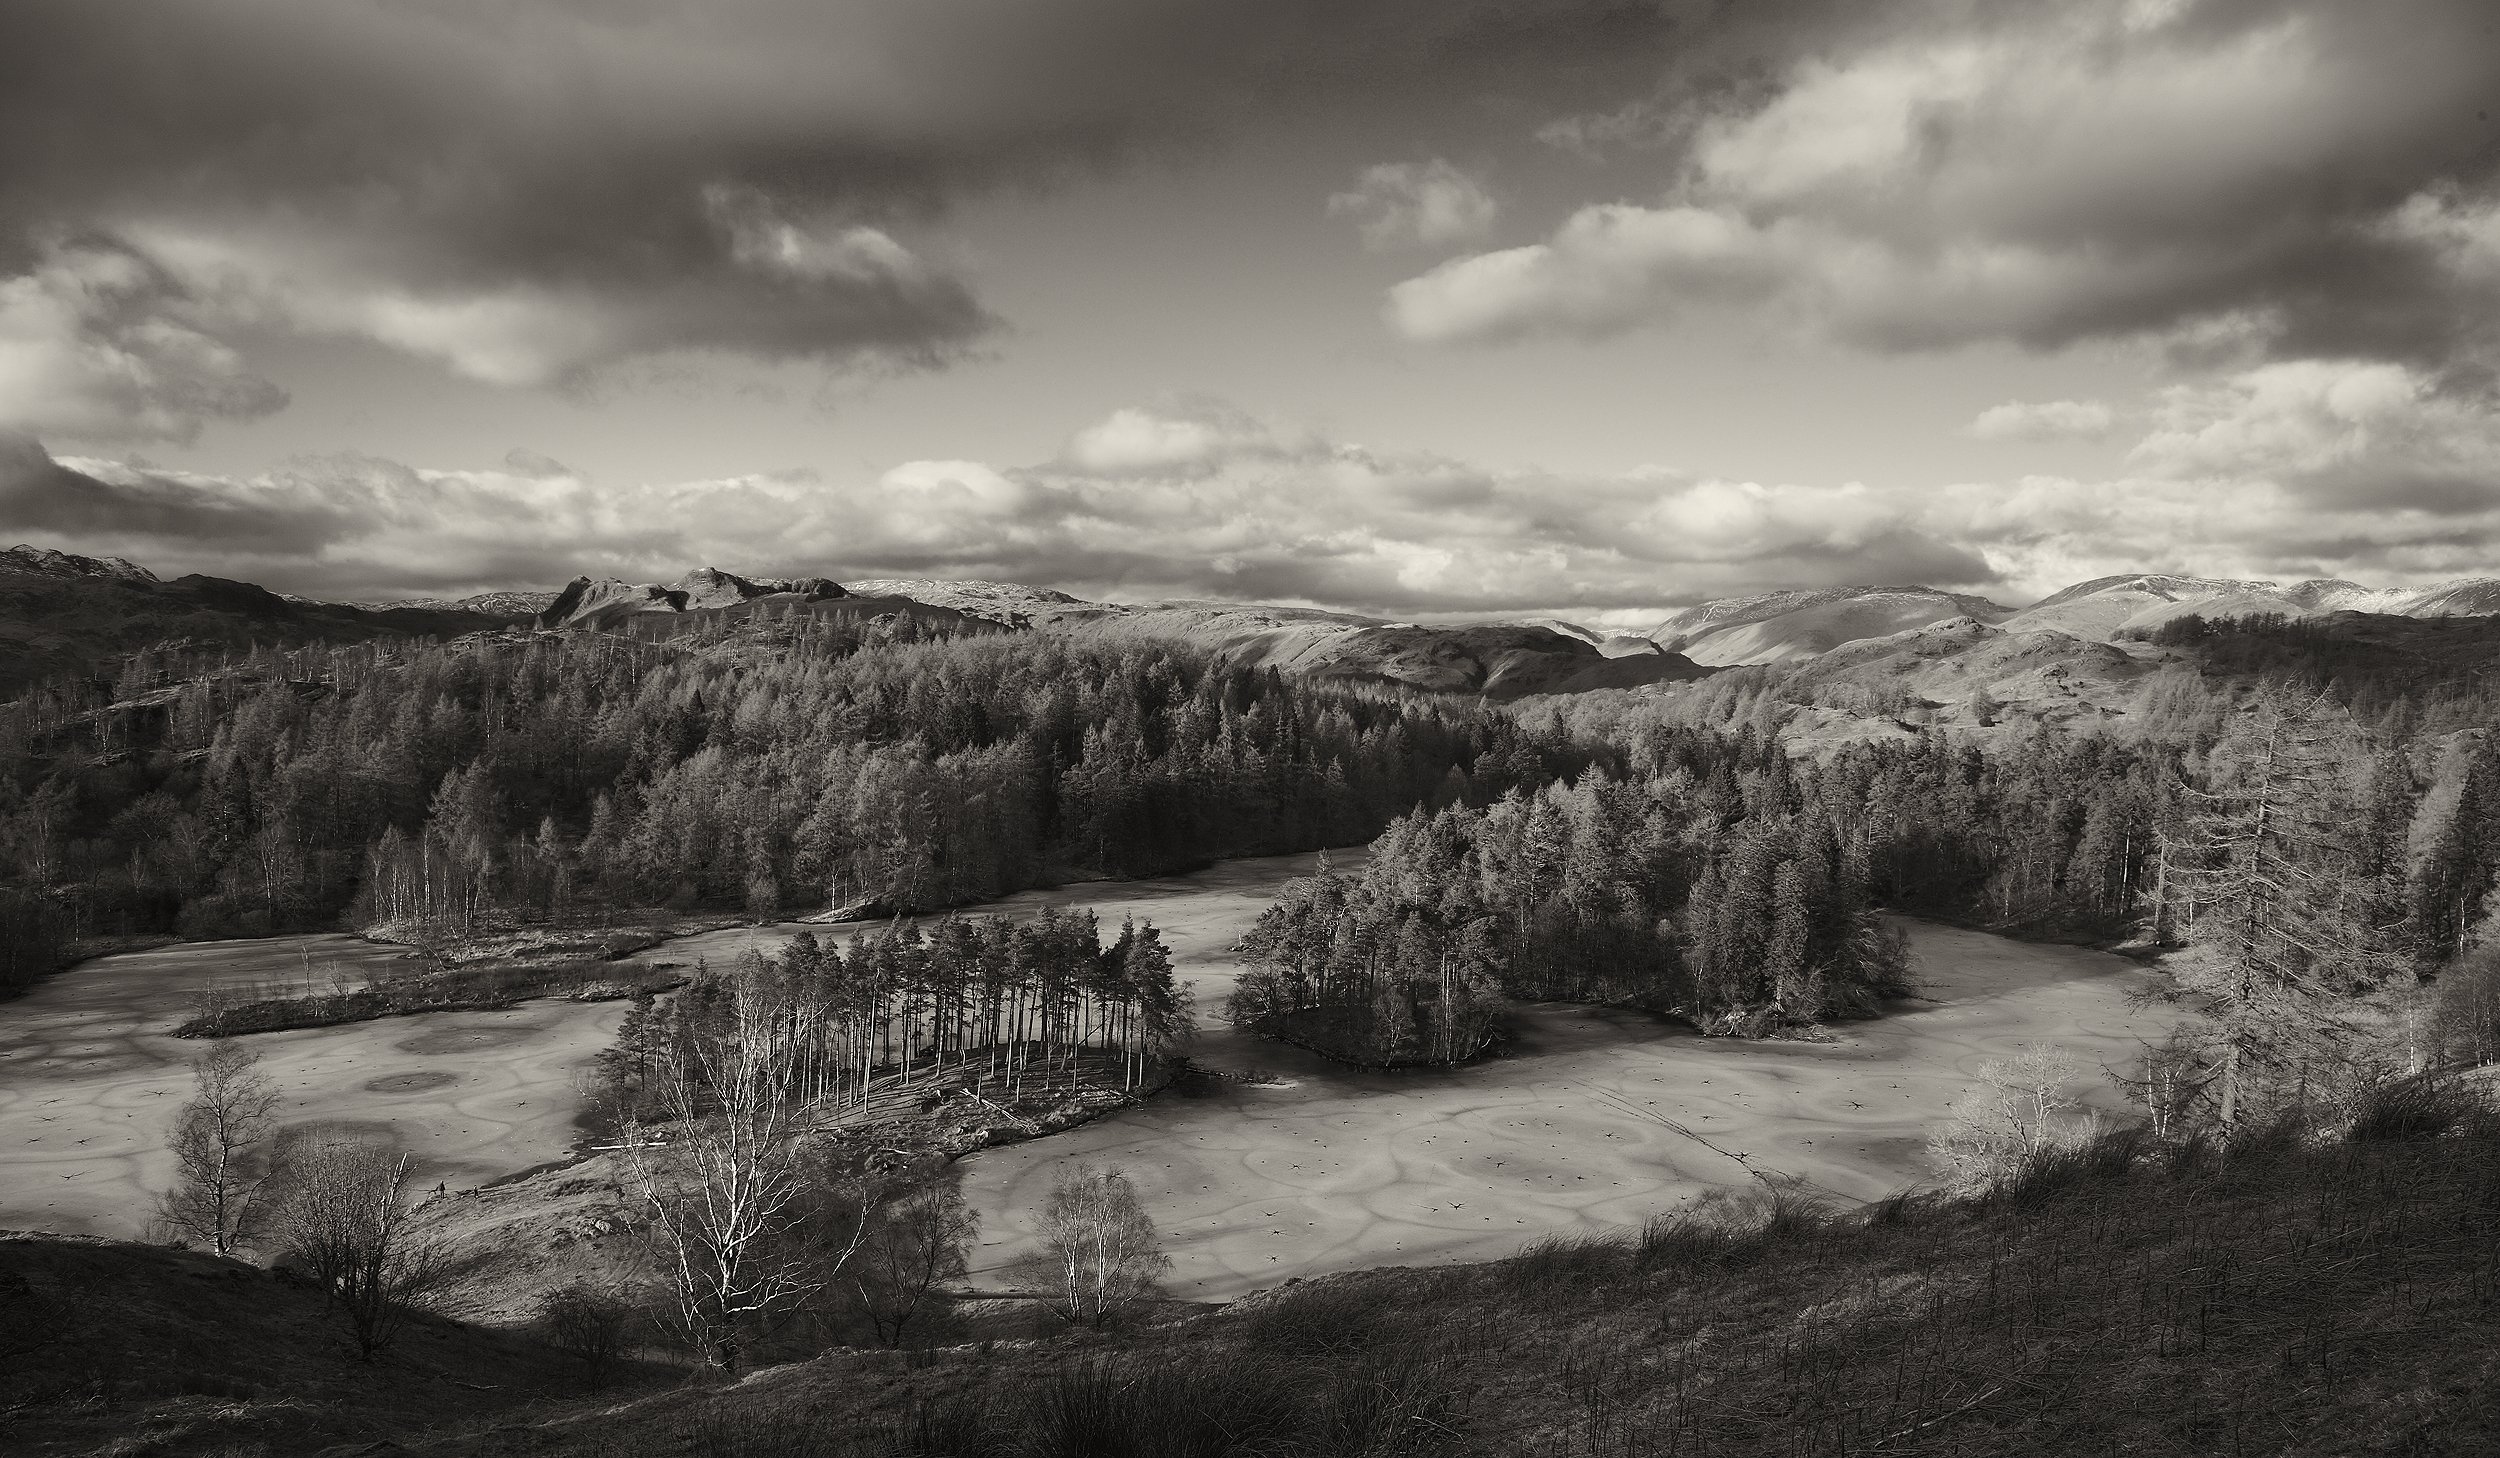 Tarn Hows, Cumbria, UK.  Landscape photography by Mike Caldwell